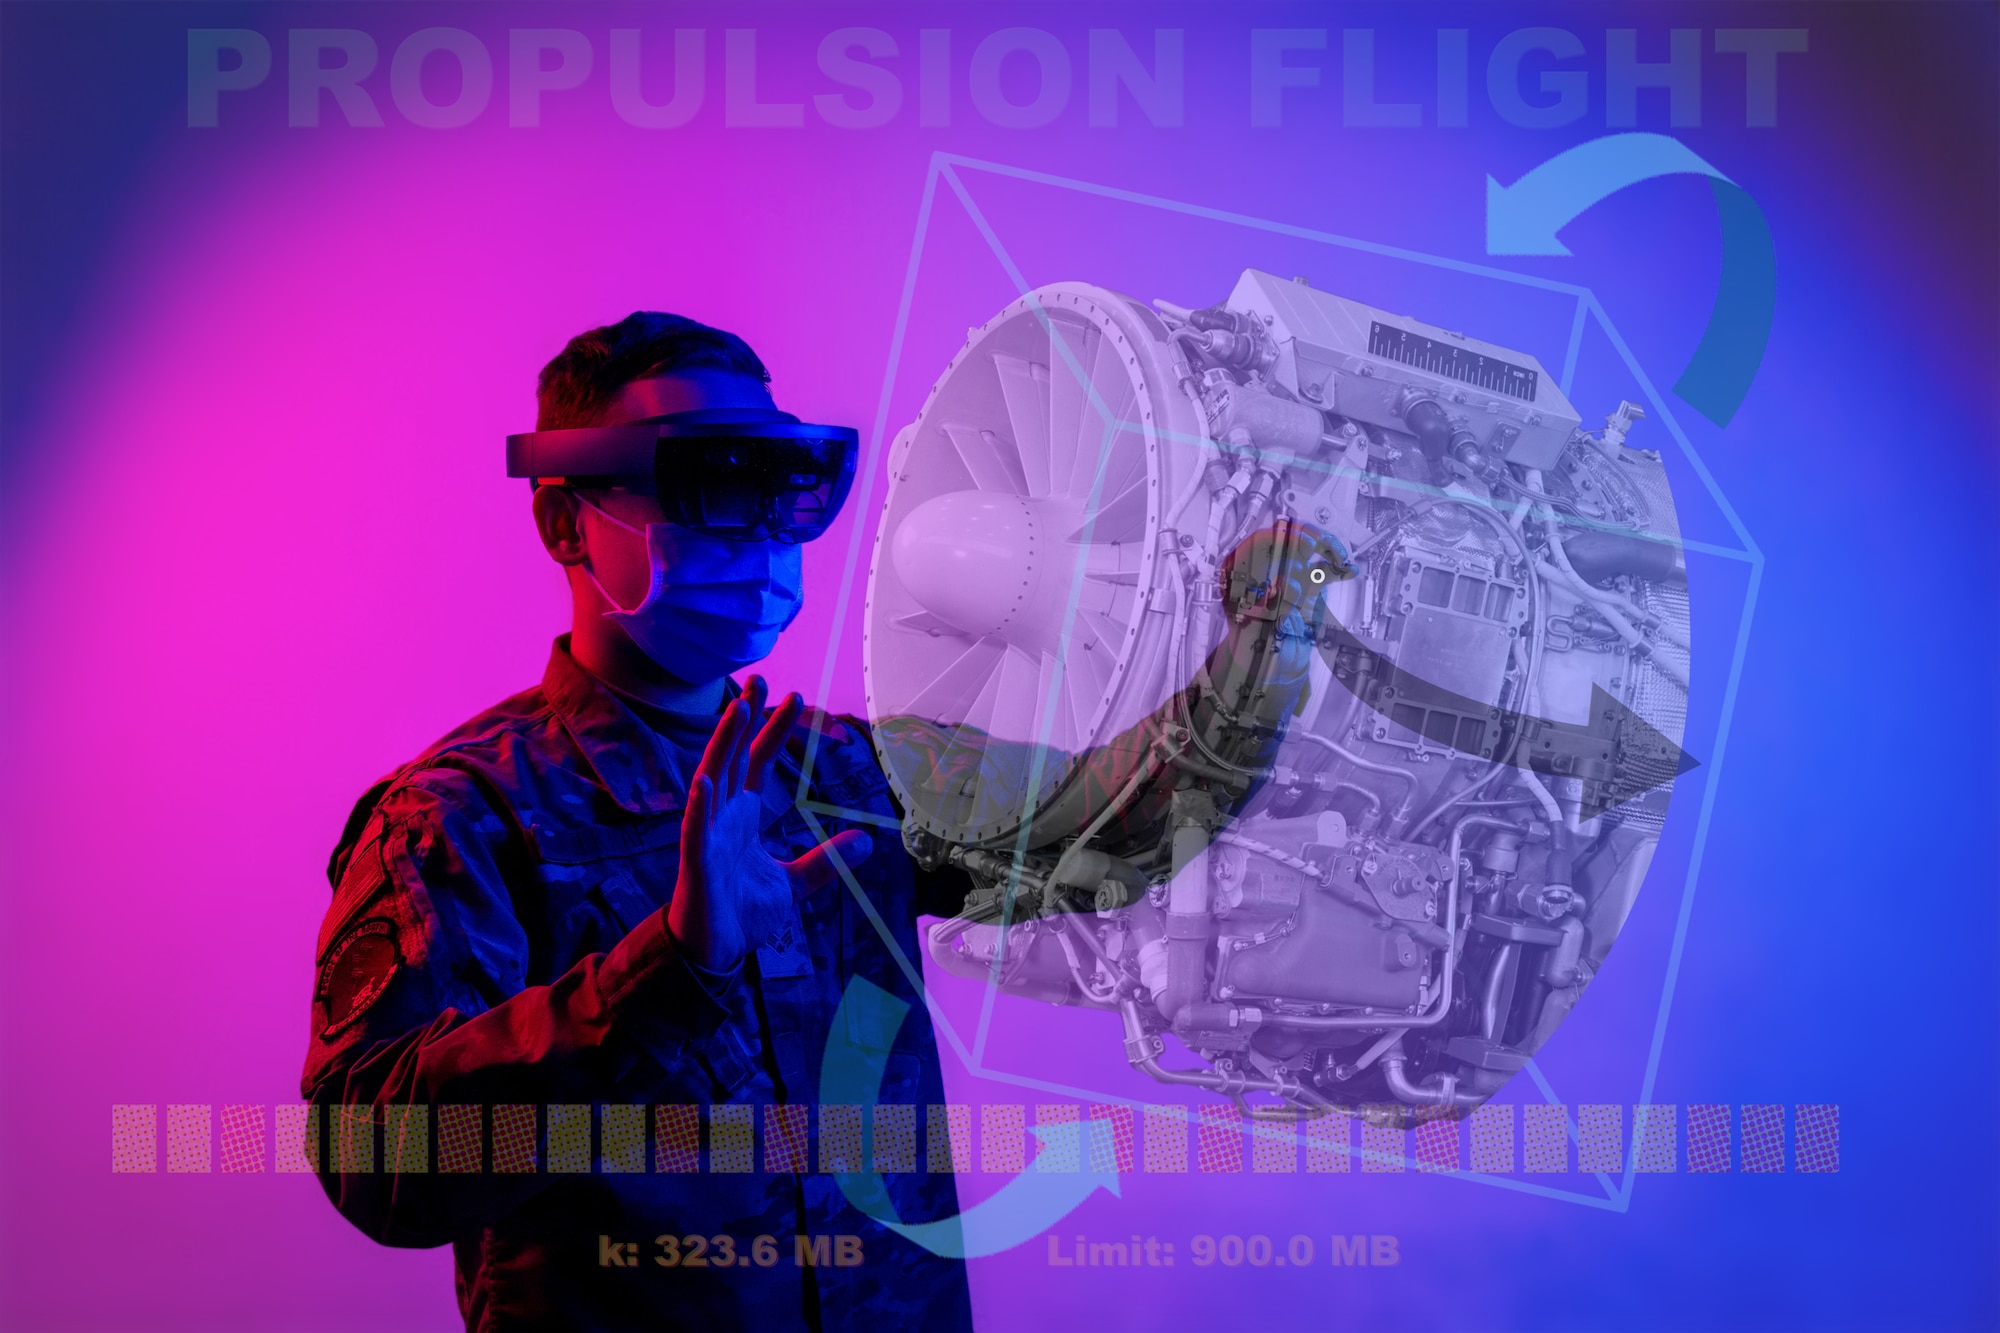 U.S. Air Force Senior Airman Logan Belknap, an aerospace propulsion journeyman assigned to the 3d Maintenance Squadron at Joint Base Elmendorf-Richardson, Alaska, wears a HoloLens headset in this illustration of the device's interactive augmented-reality capabilities. The headset is being used to train Airmen on advanced avionic and propulsion maintenance techniques being developed and implemented in a coordinated effort with multiple bases across the force. "Empowered Airmen can solve any problem," said Chief of Staff of the U.S. Air Force, Gen. Charles Q. Brown Jr., in his "Accelerate Change or Lose" strategy. The initiative propels American Airmen into an innovative future leveraging technological superiority now. (U.S. Air Force photo illustration by Justin Connaher)